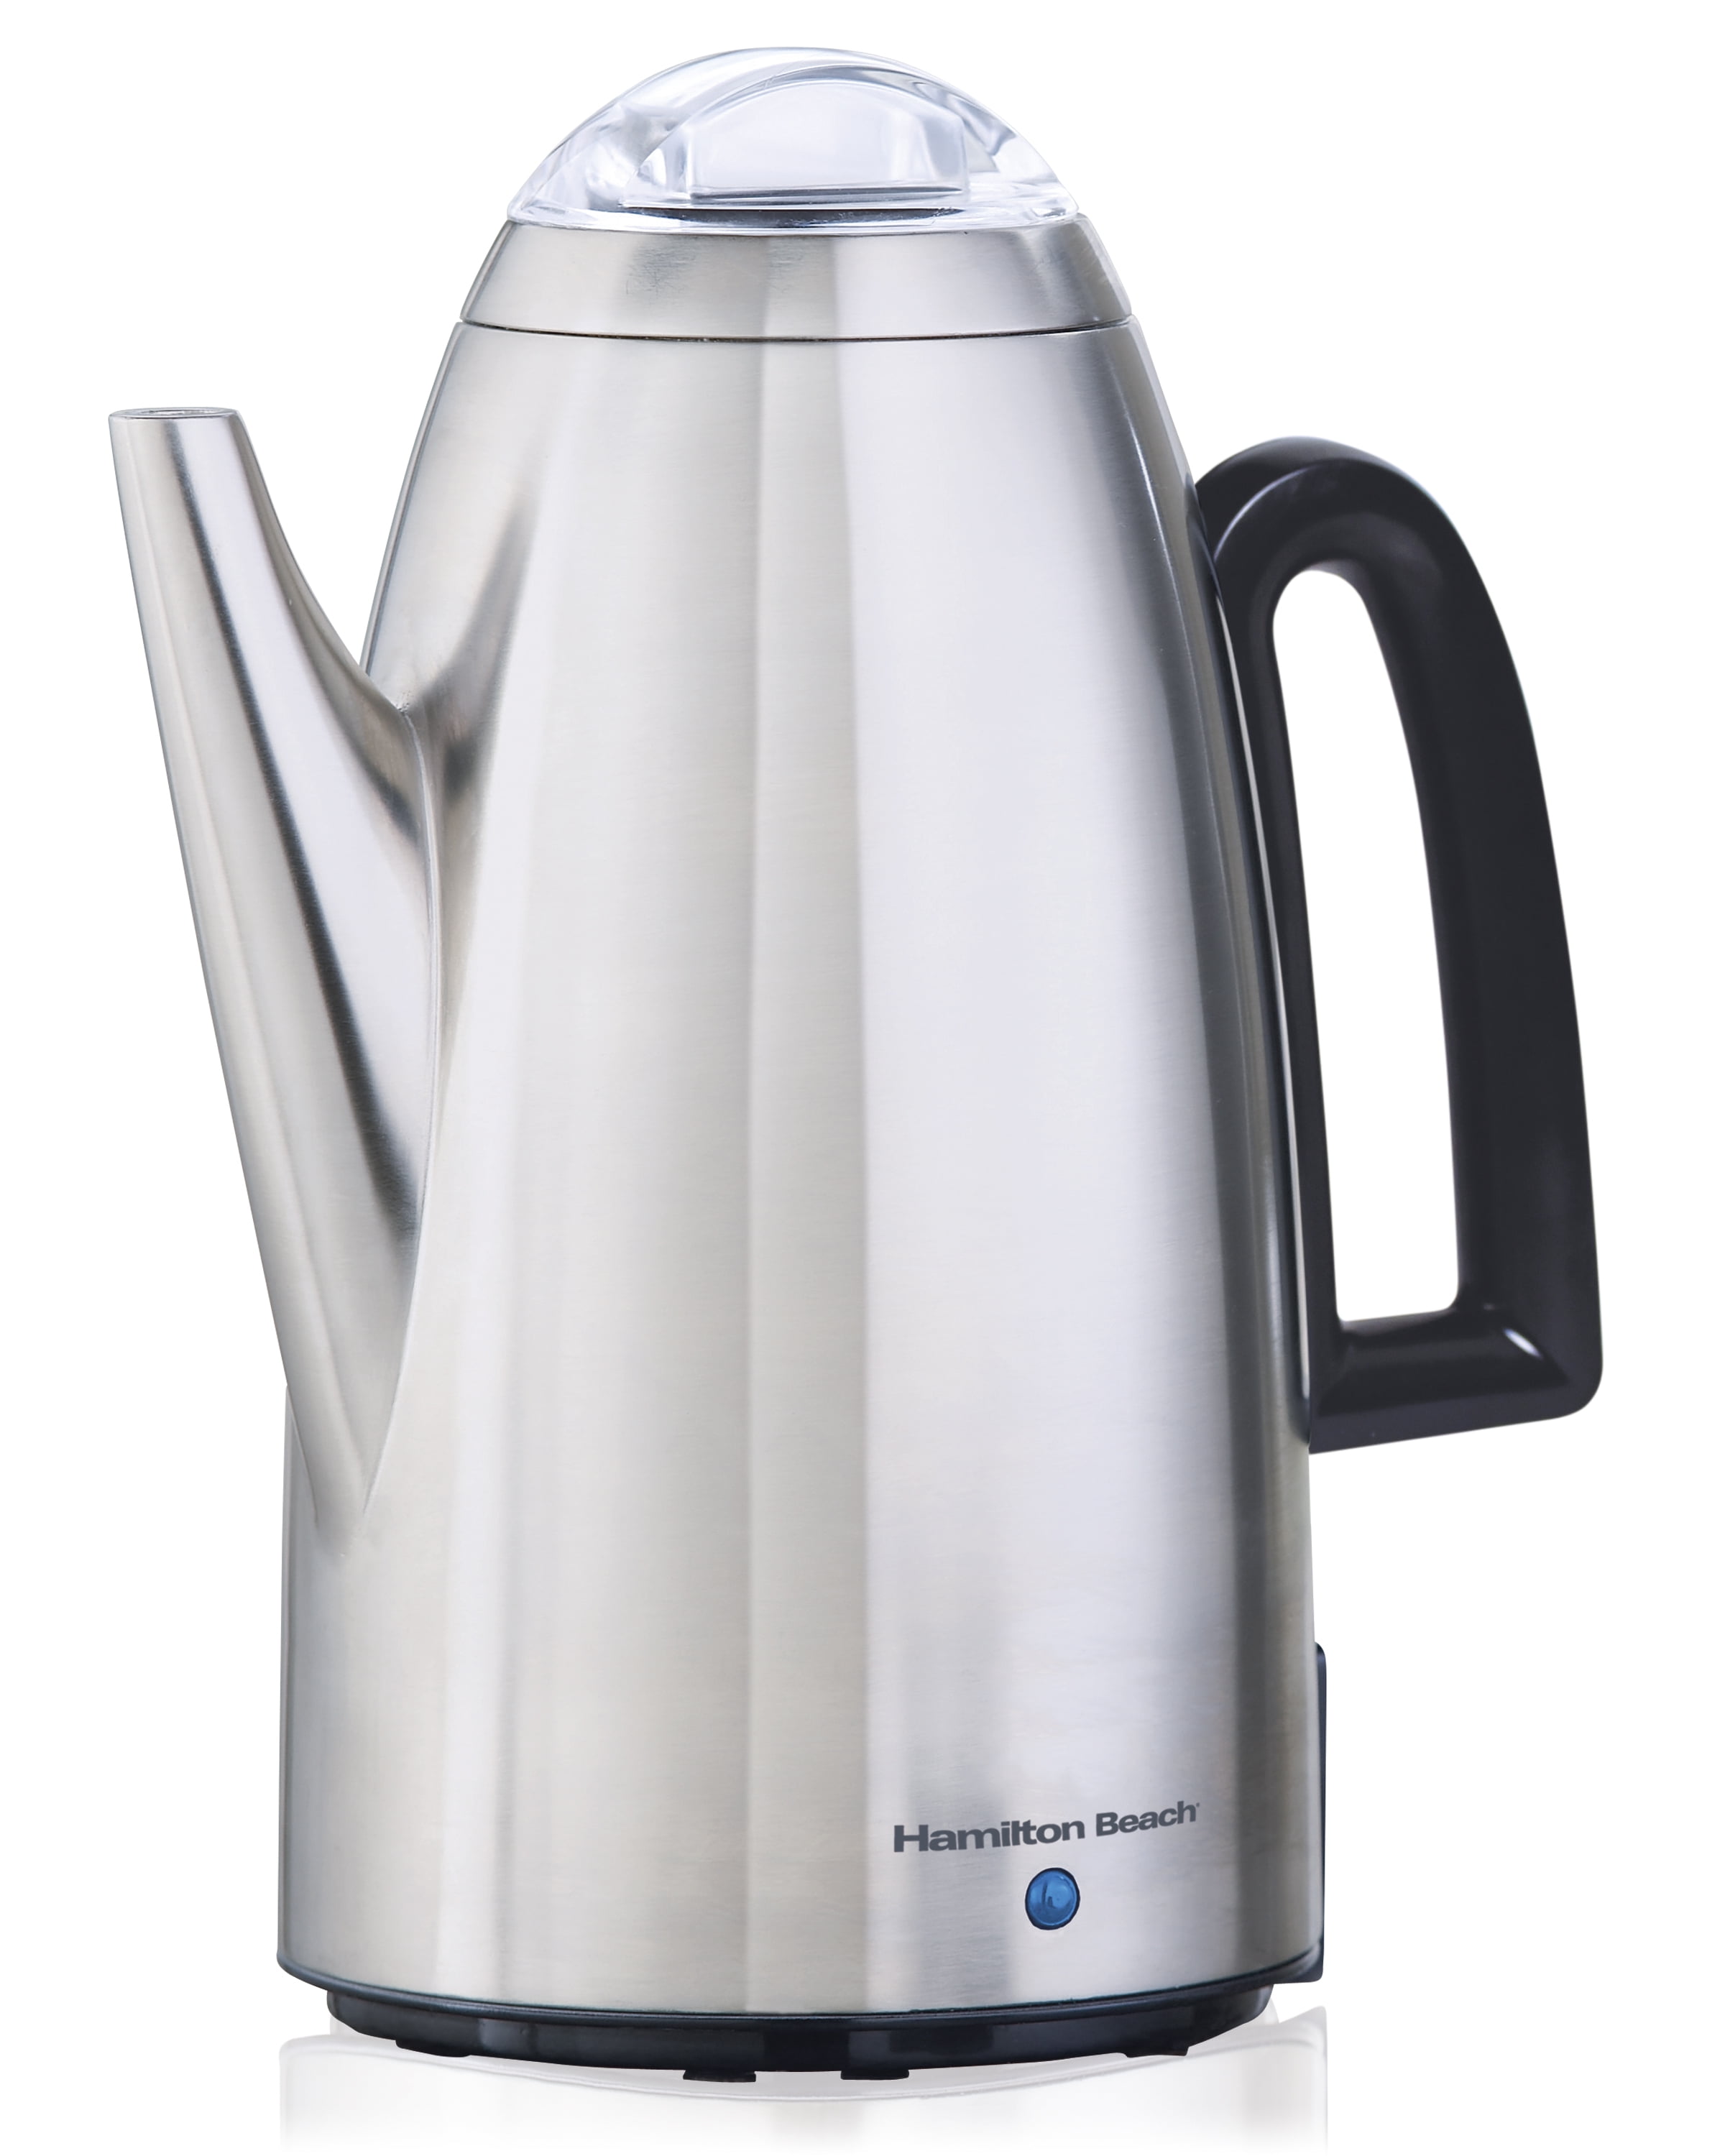 Hamilton Beach 12-Cup Electric Percolator Coffee Pot Maker 40616 Stainless  Steel